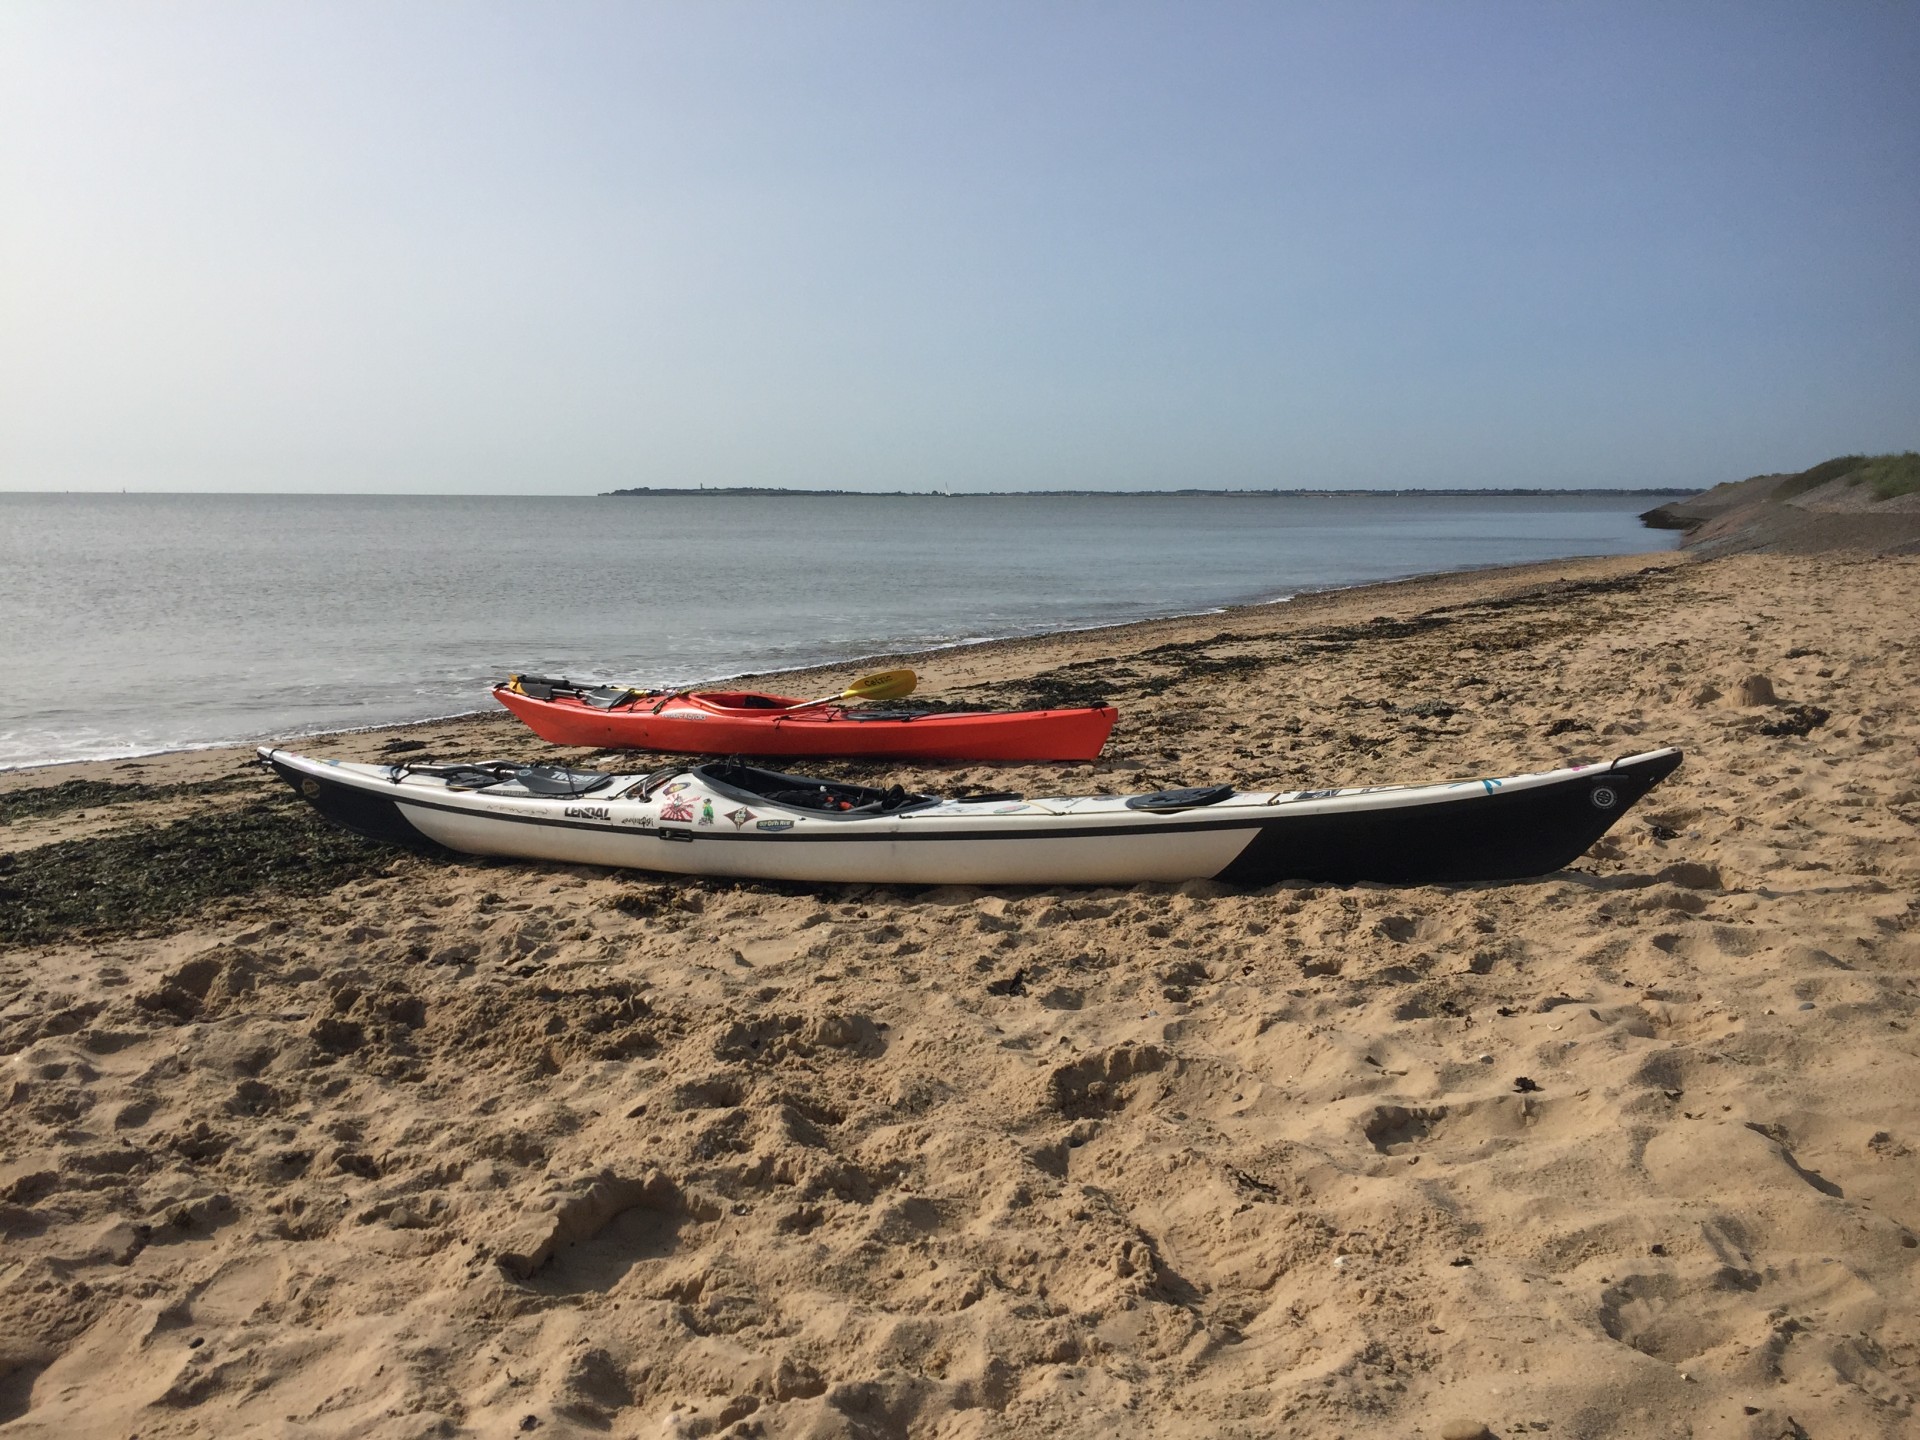 Sea kayaks on sandy beach for the guided seal colony eco tour by kayak.